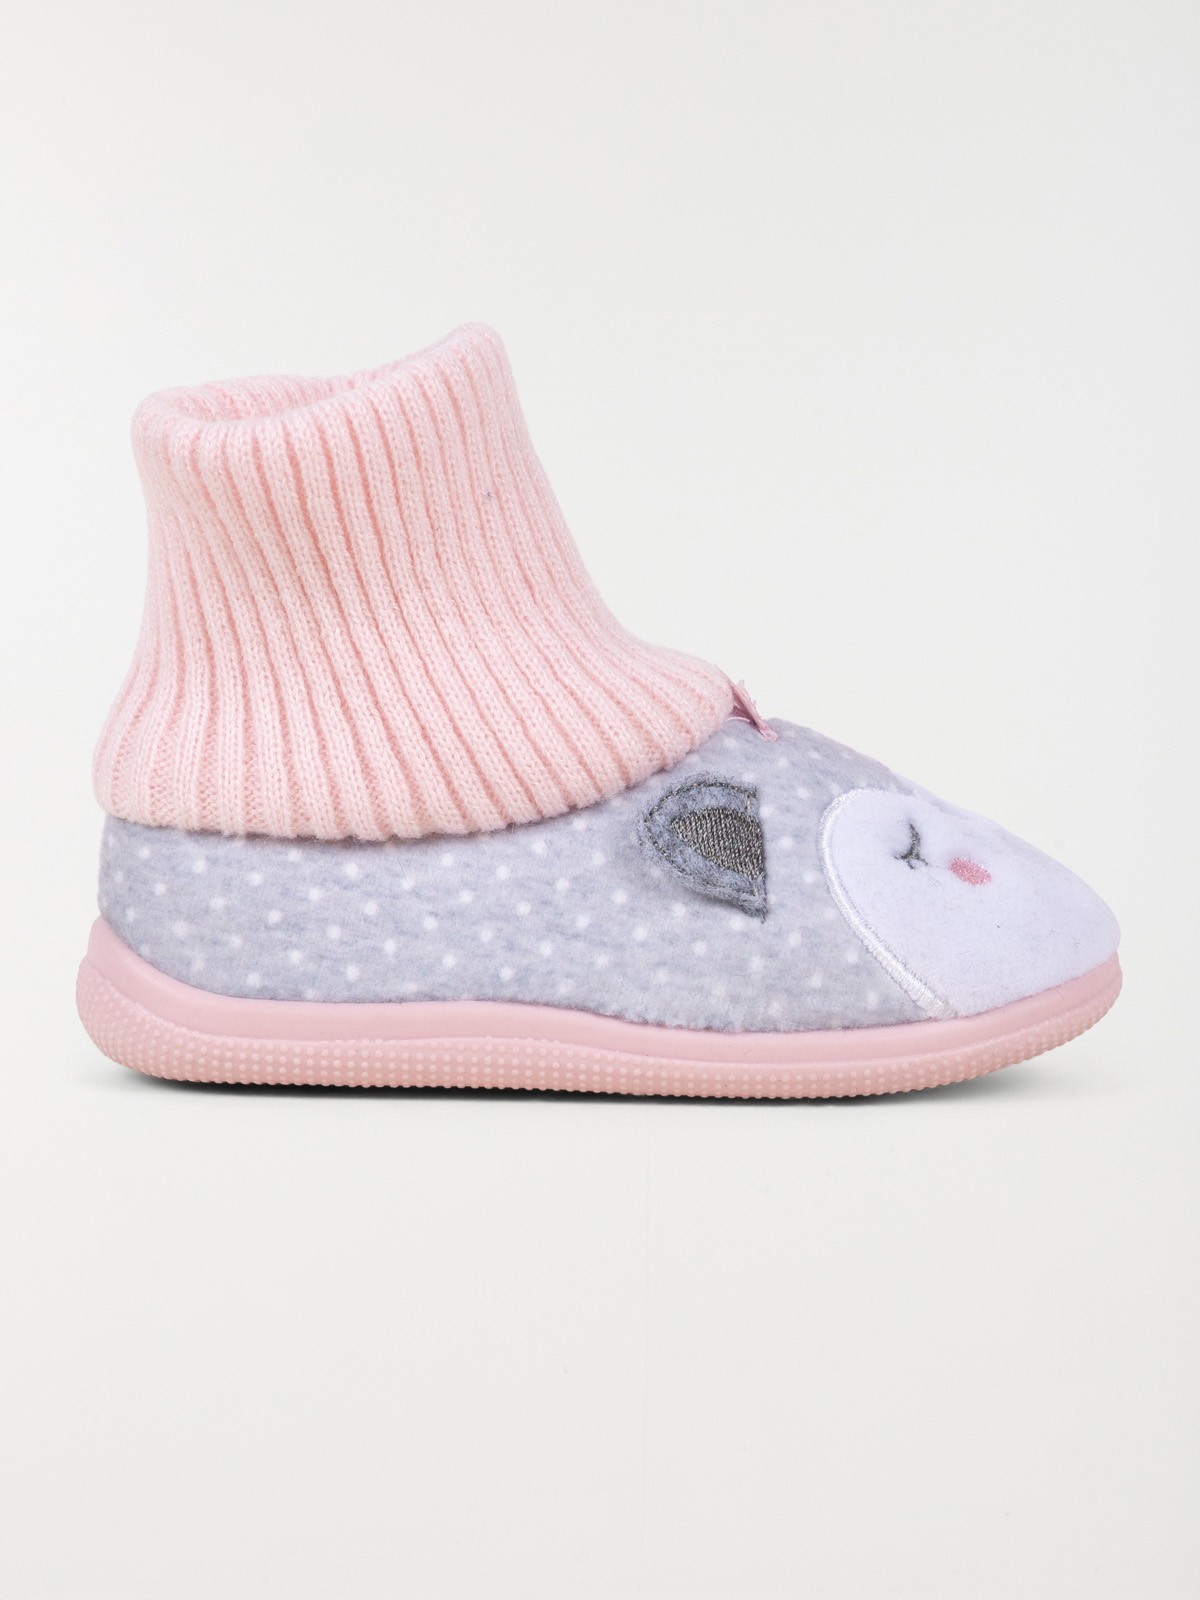 Chaussette chausson bebe